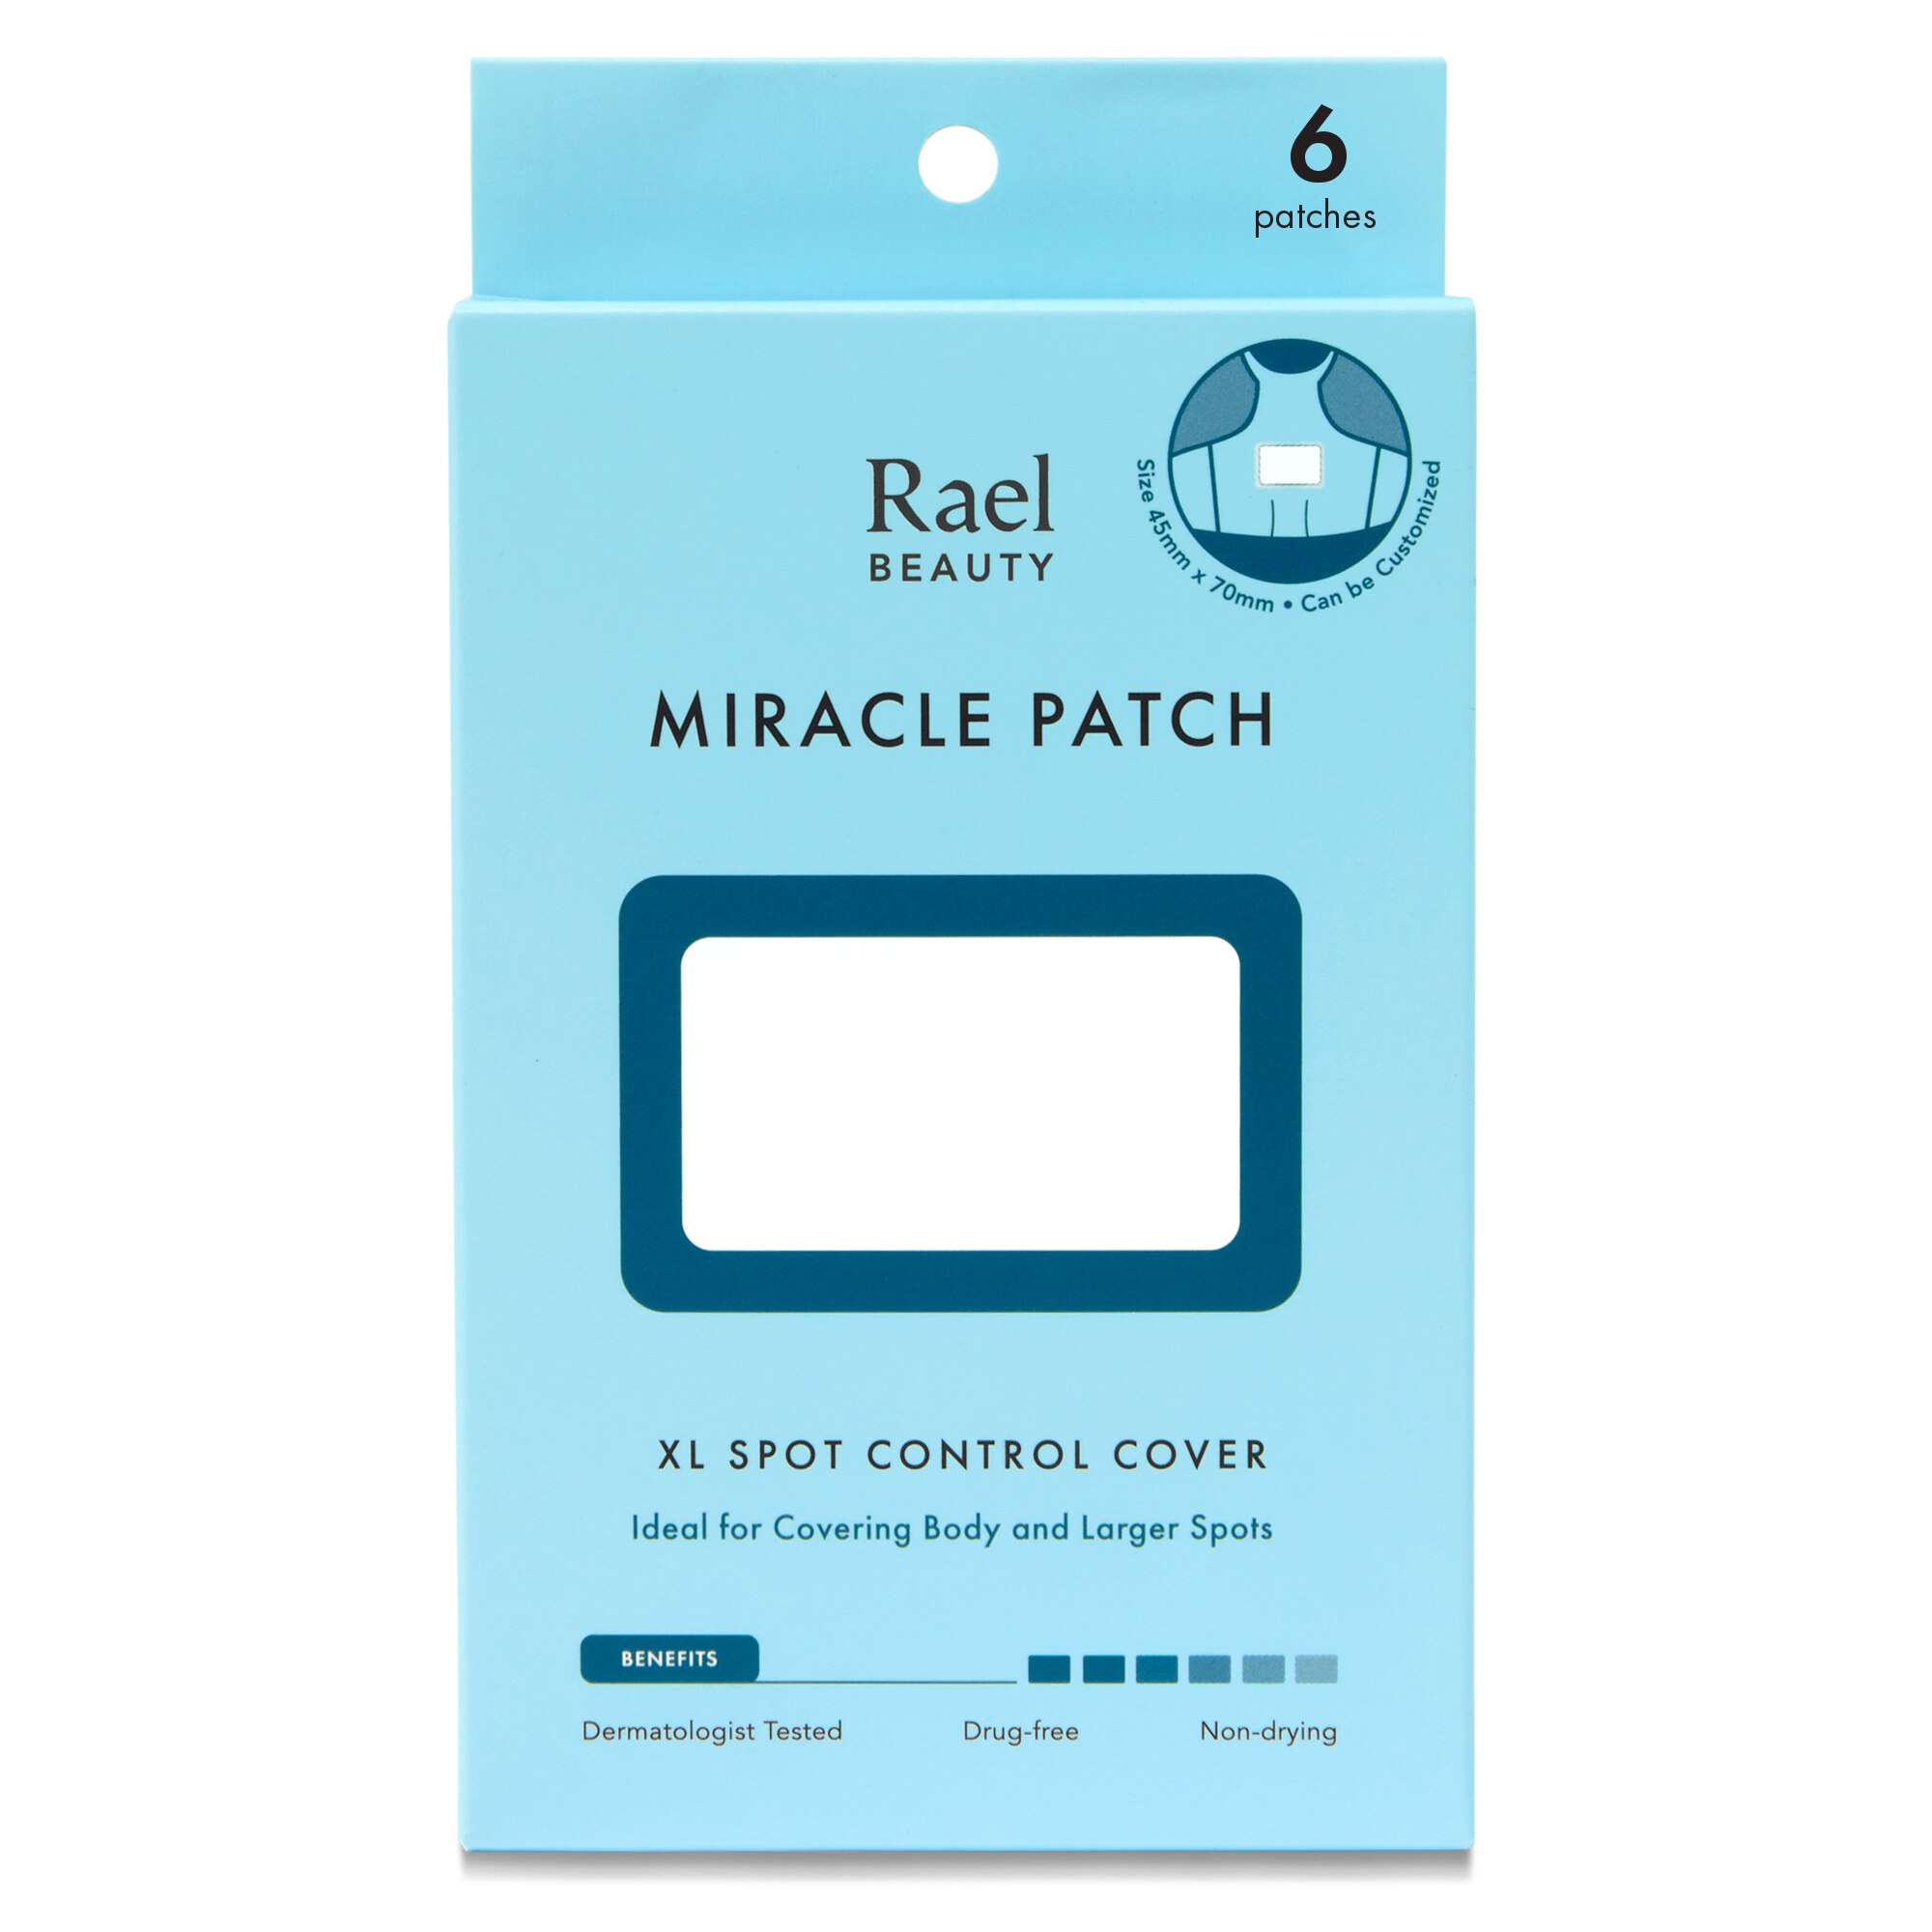 Rael Beauty Miracle Patch XL Spot Control Cover, 6CT